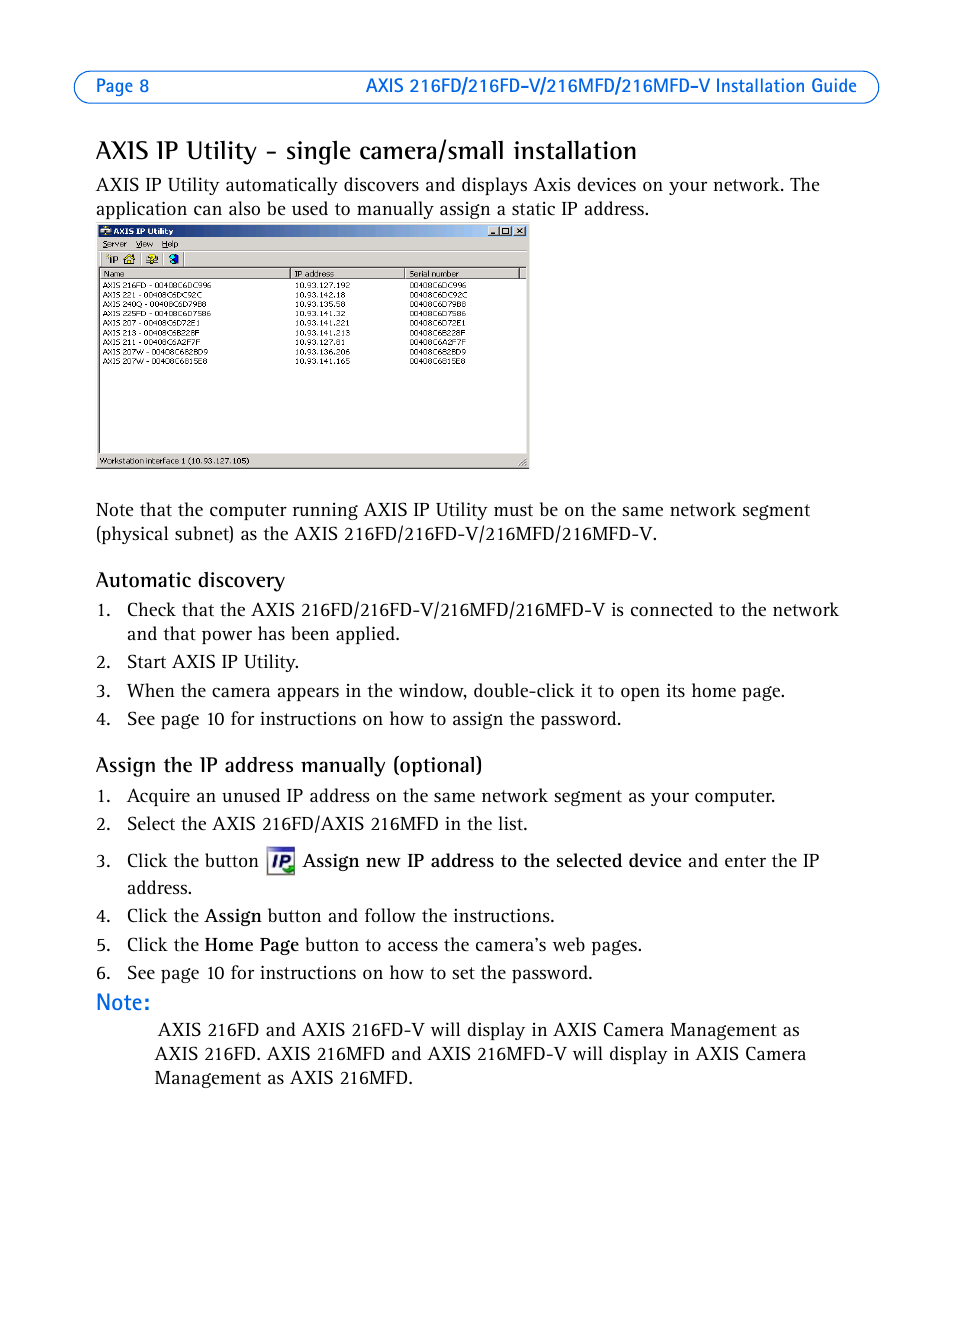 Axis ip utility - single camera/small installation | Axis Communications  Axis 216FD User Manual | Page 8 / 74